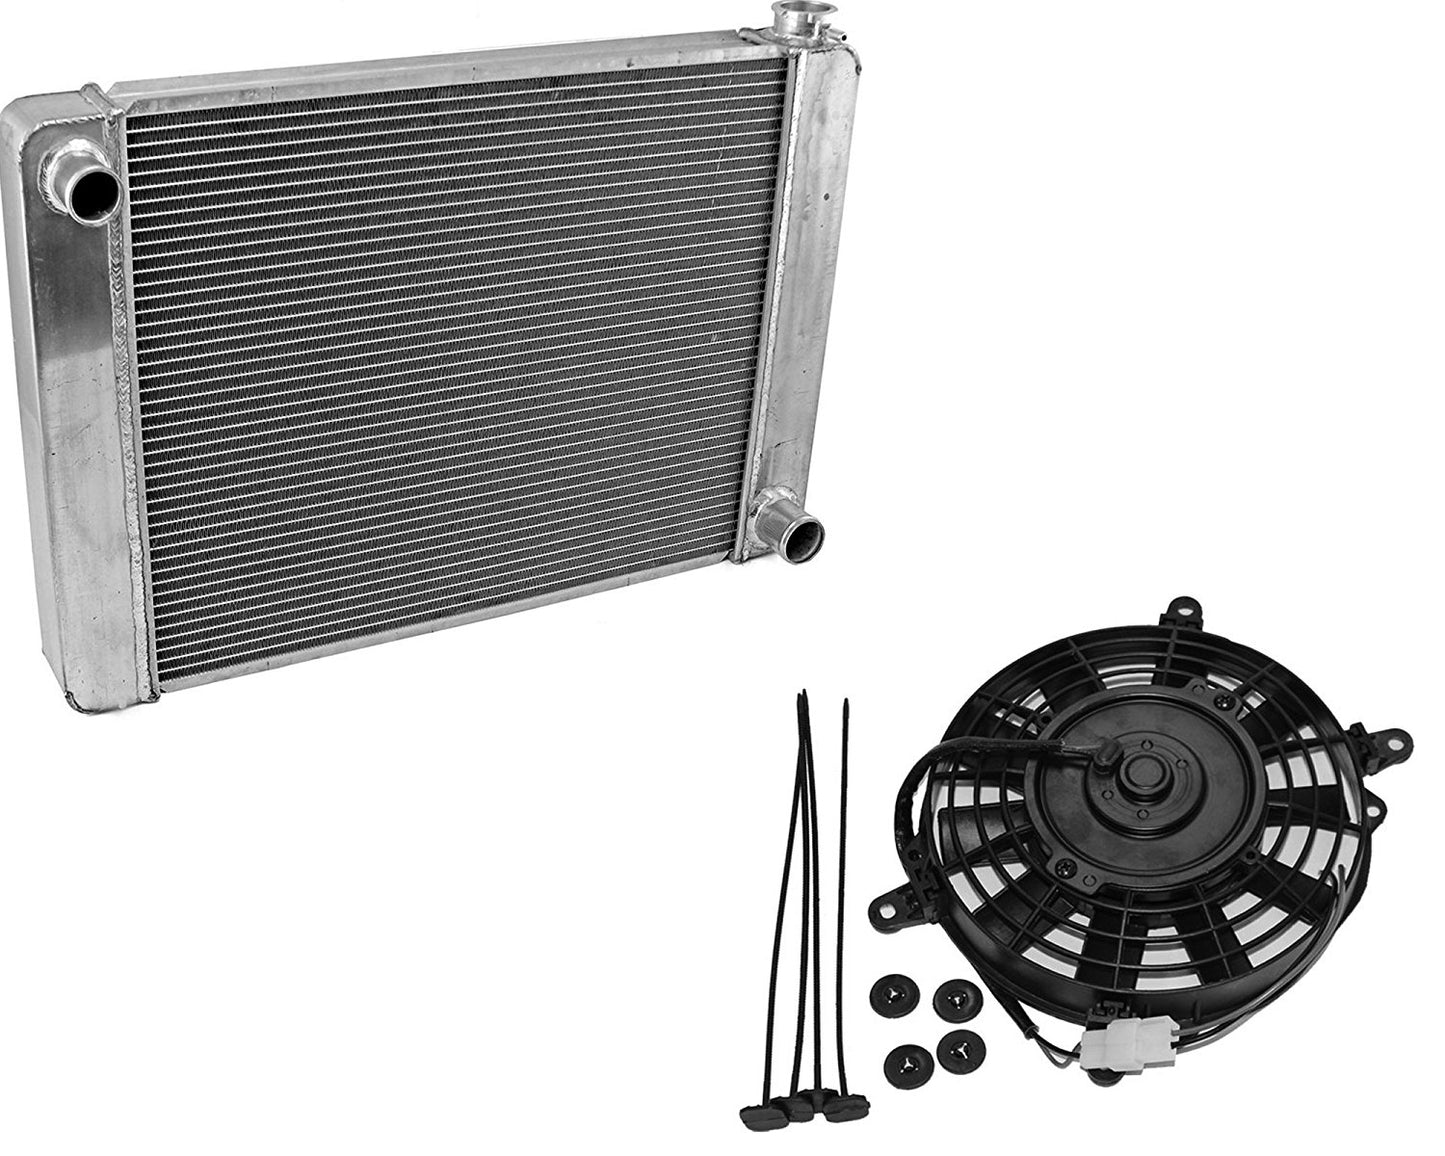 Fabricated Aluminum Radiator 24" x 19" x 3" Overall For SBC BBC Chevy GM&8" Heavy Duty Staight Blade Electric Cooling Fan